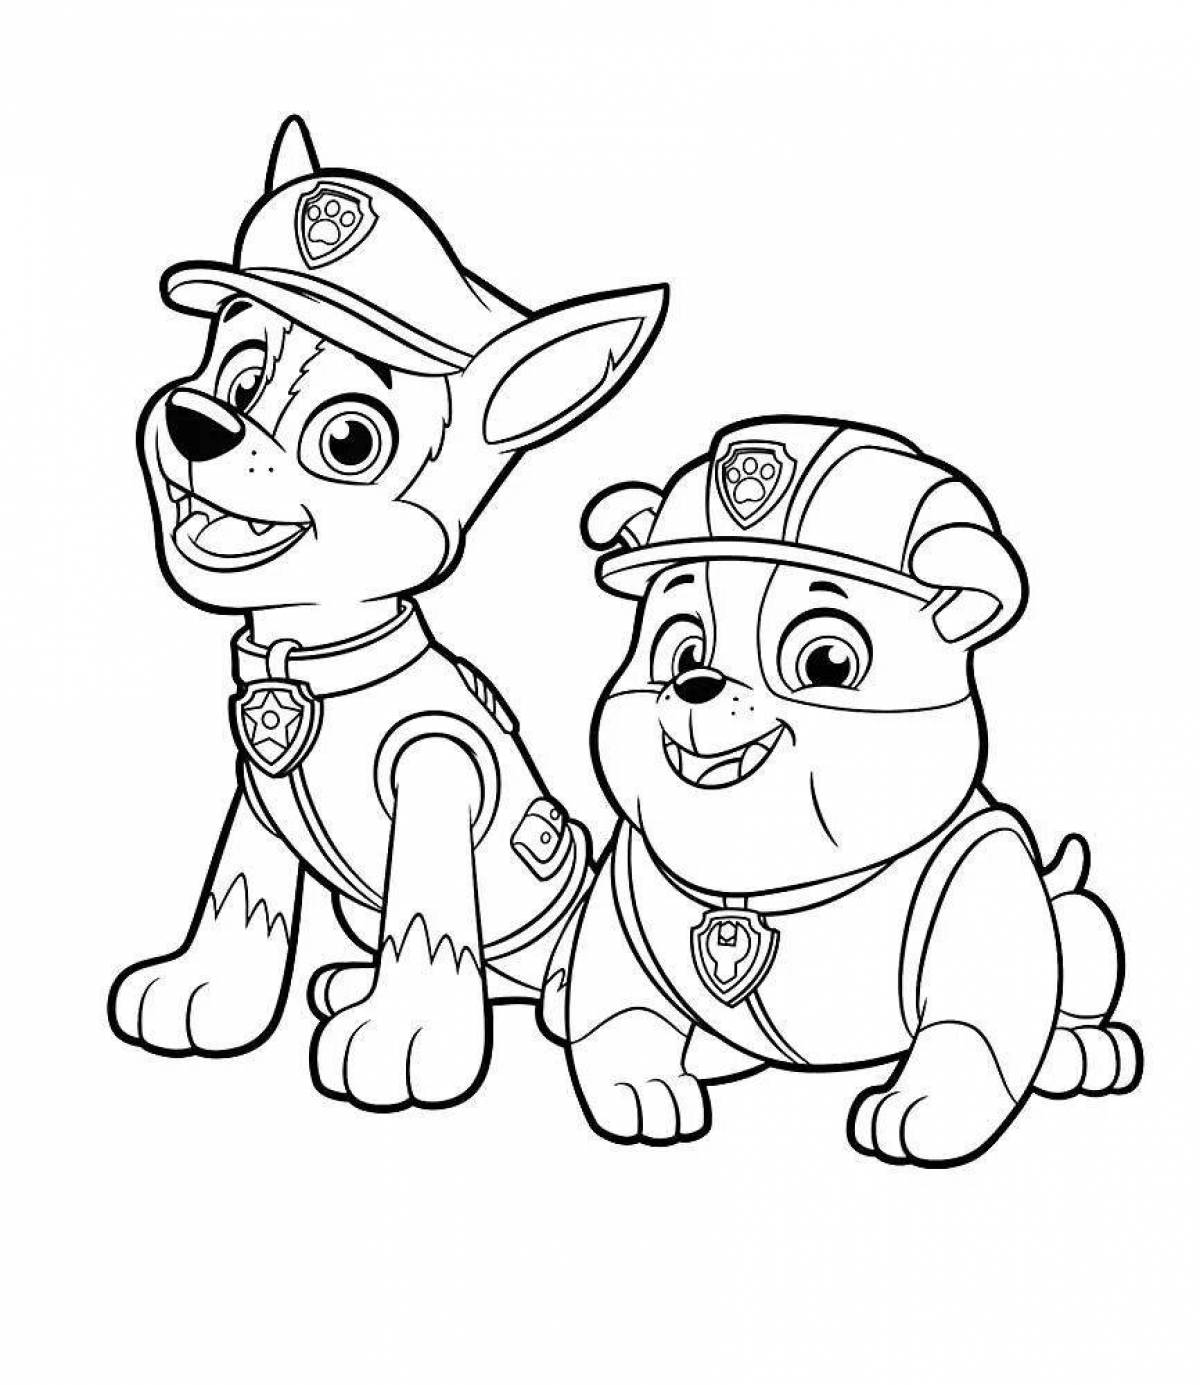 Tempting Paw Patrol Coloring Page for Boys